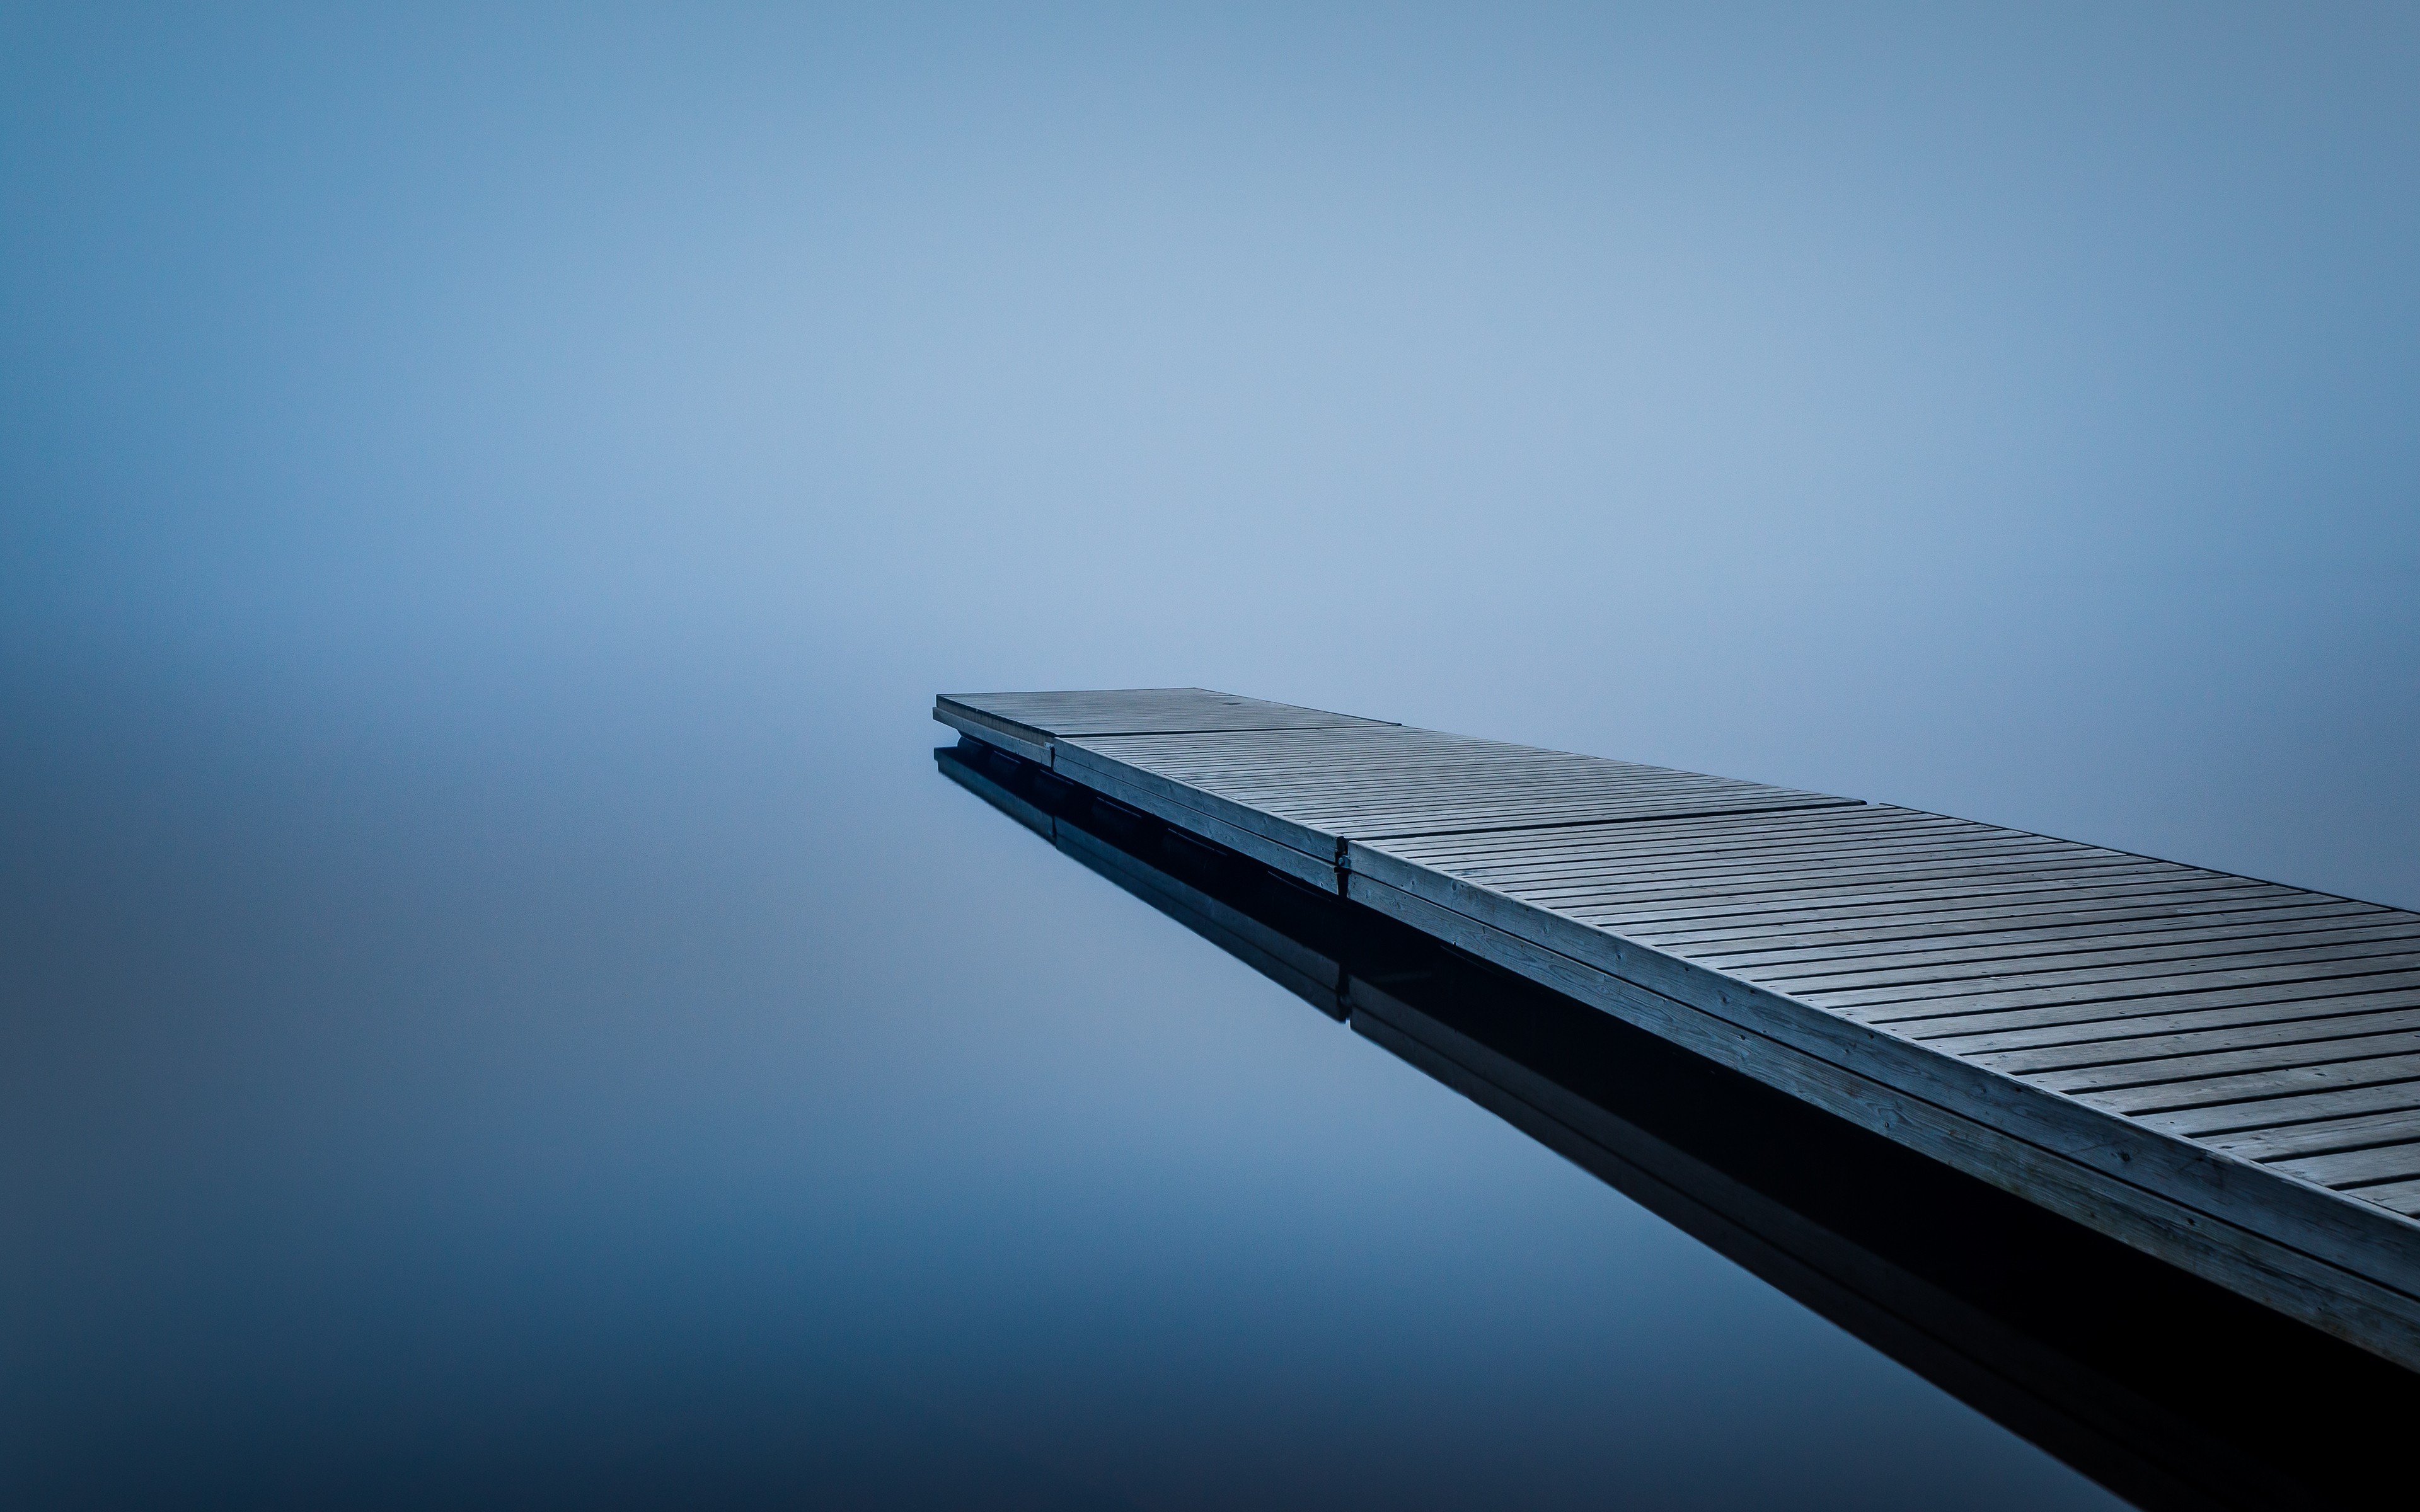 General 3840x2400 pier water outdoors jetty simple background reflection minimalism